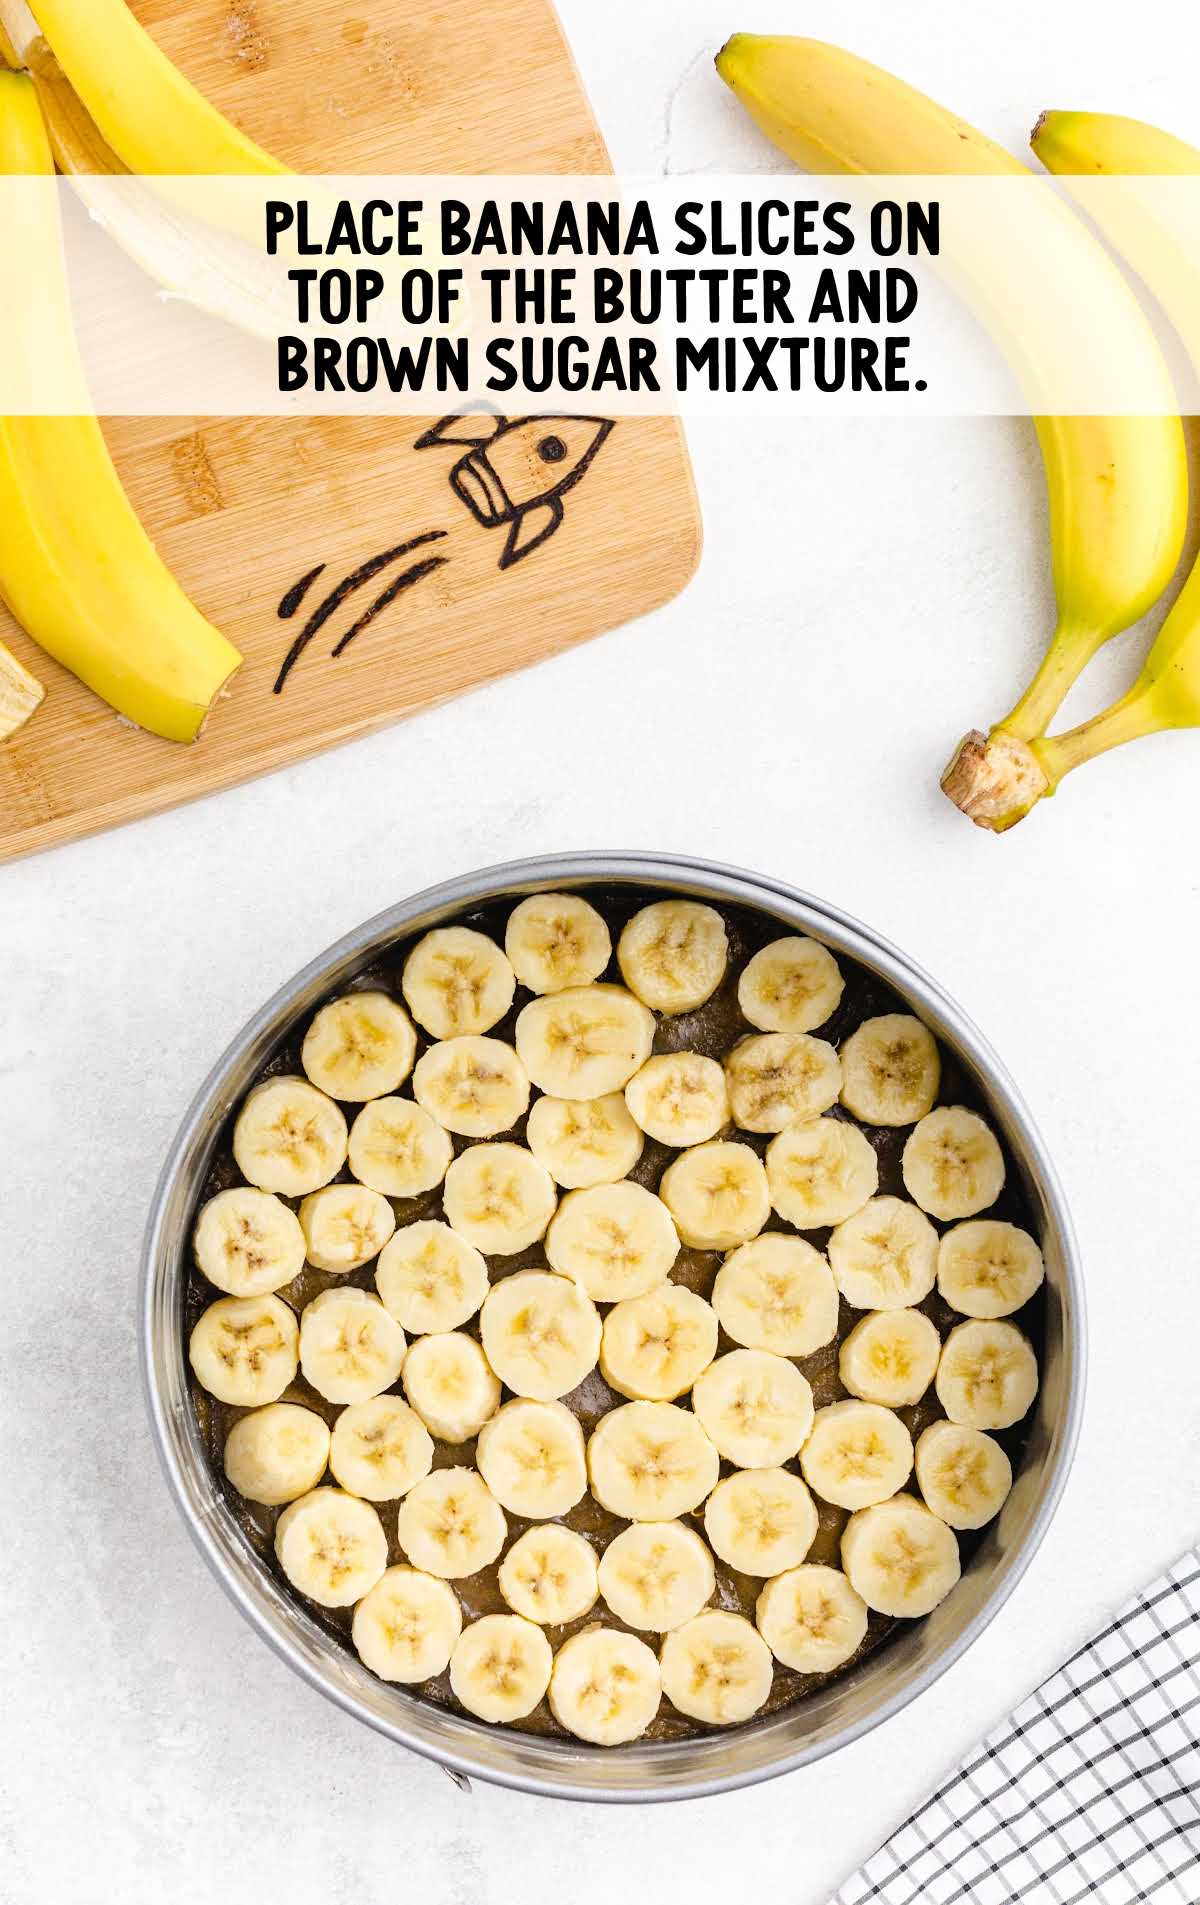 banana slices placed on top of the butter and brown sugar mixture in a cake pan